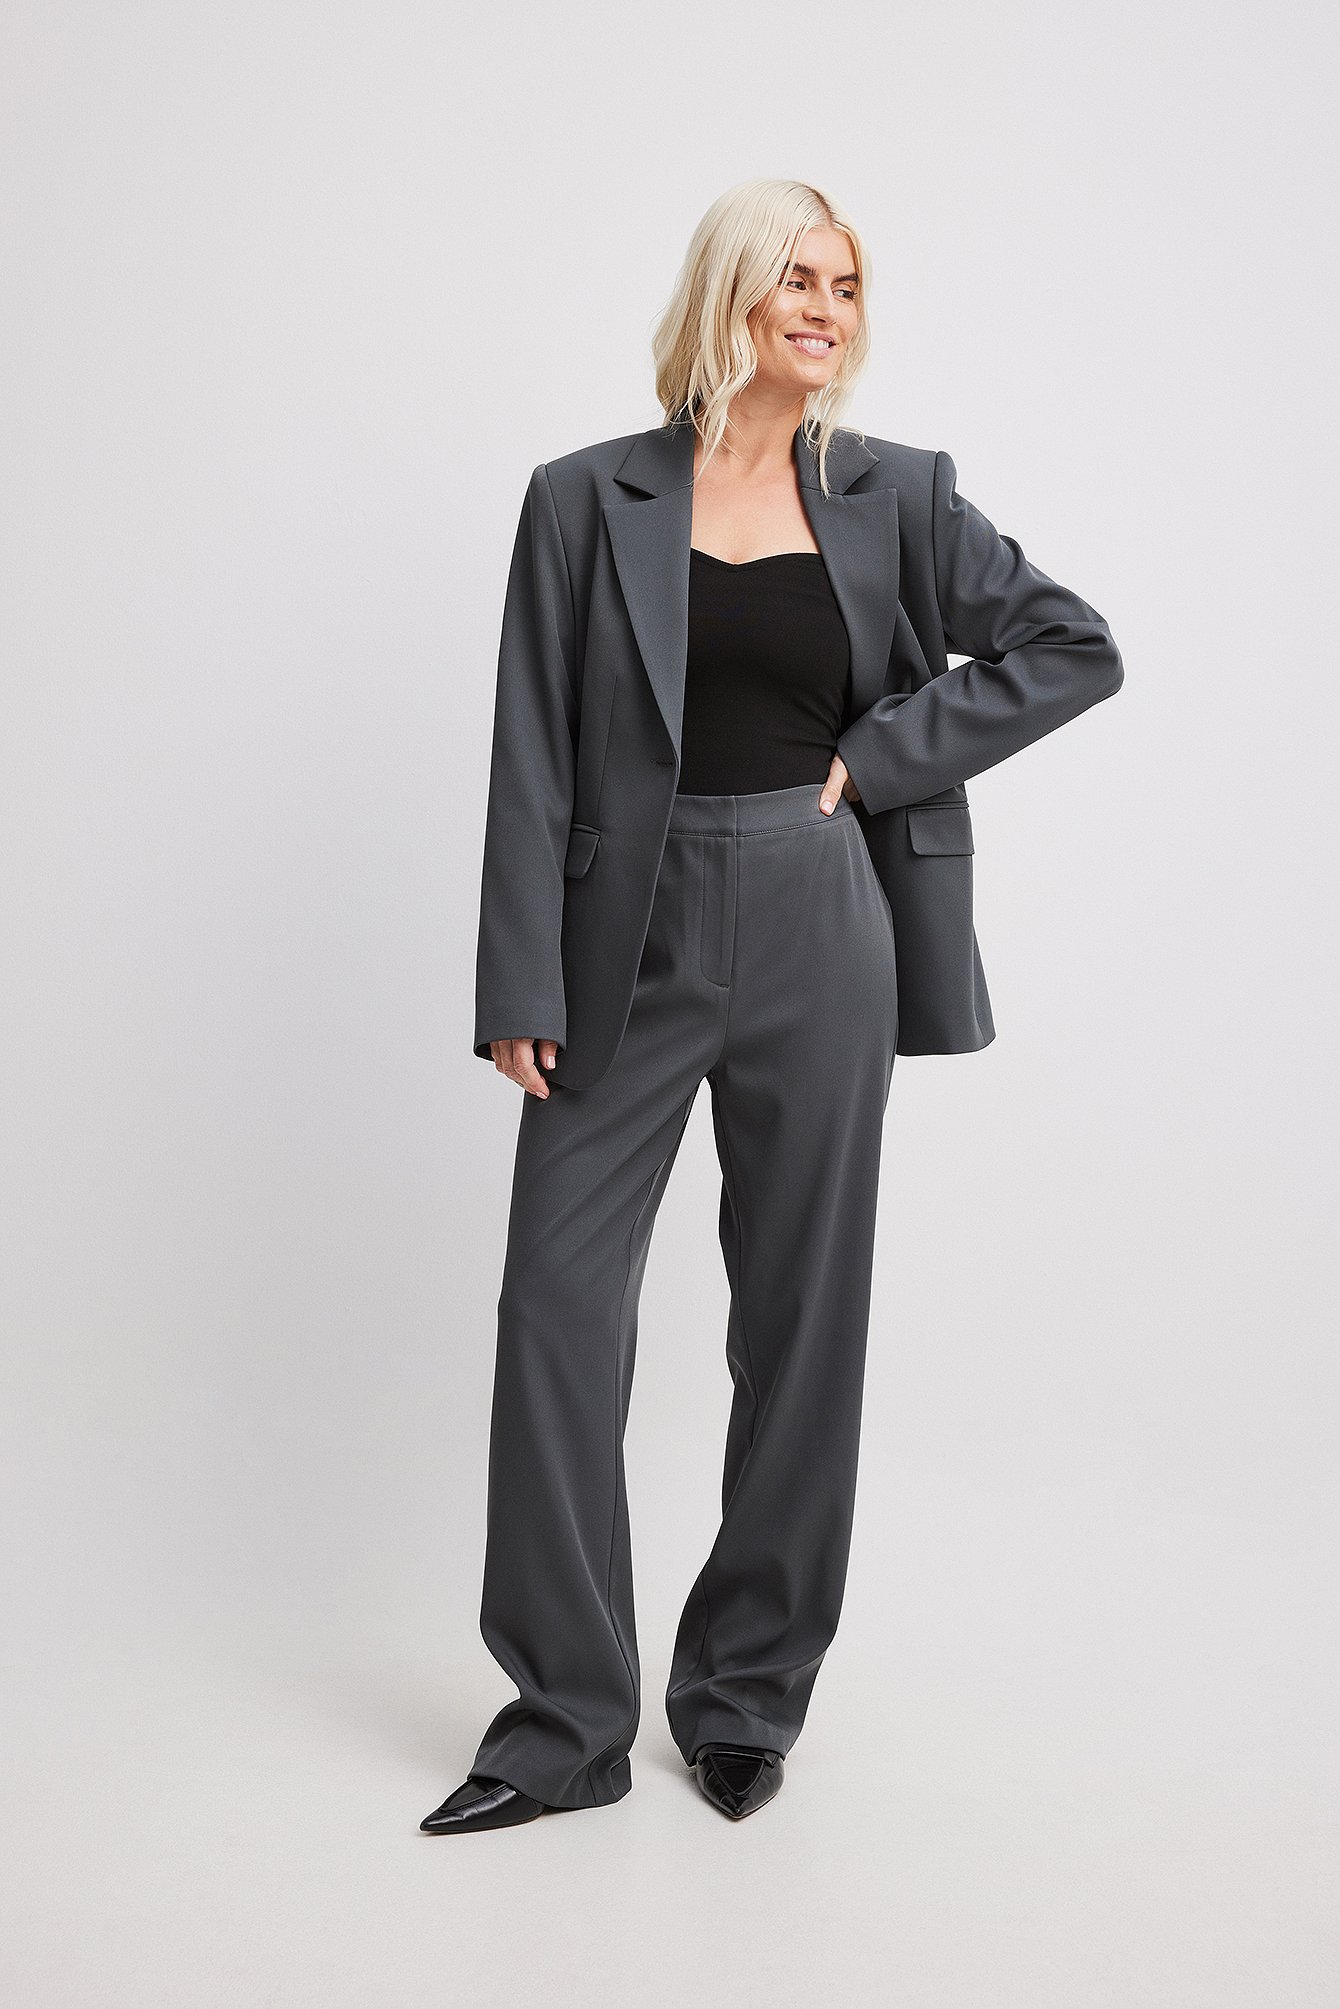 Buy Grey Gota Patti Straight / Trouser Suits Online for Women in USA